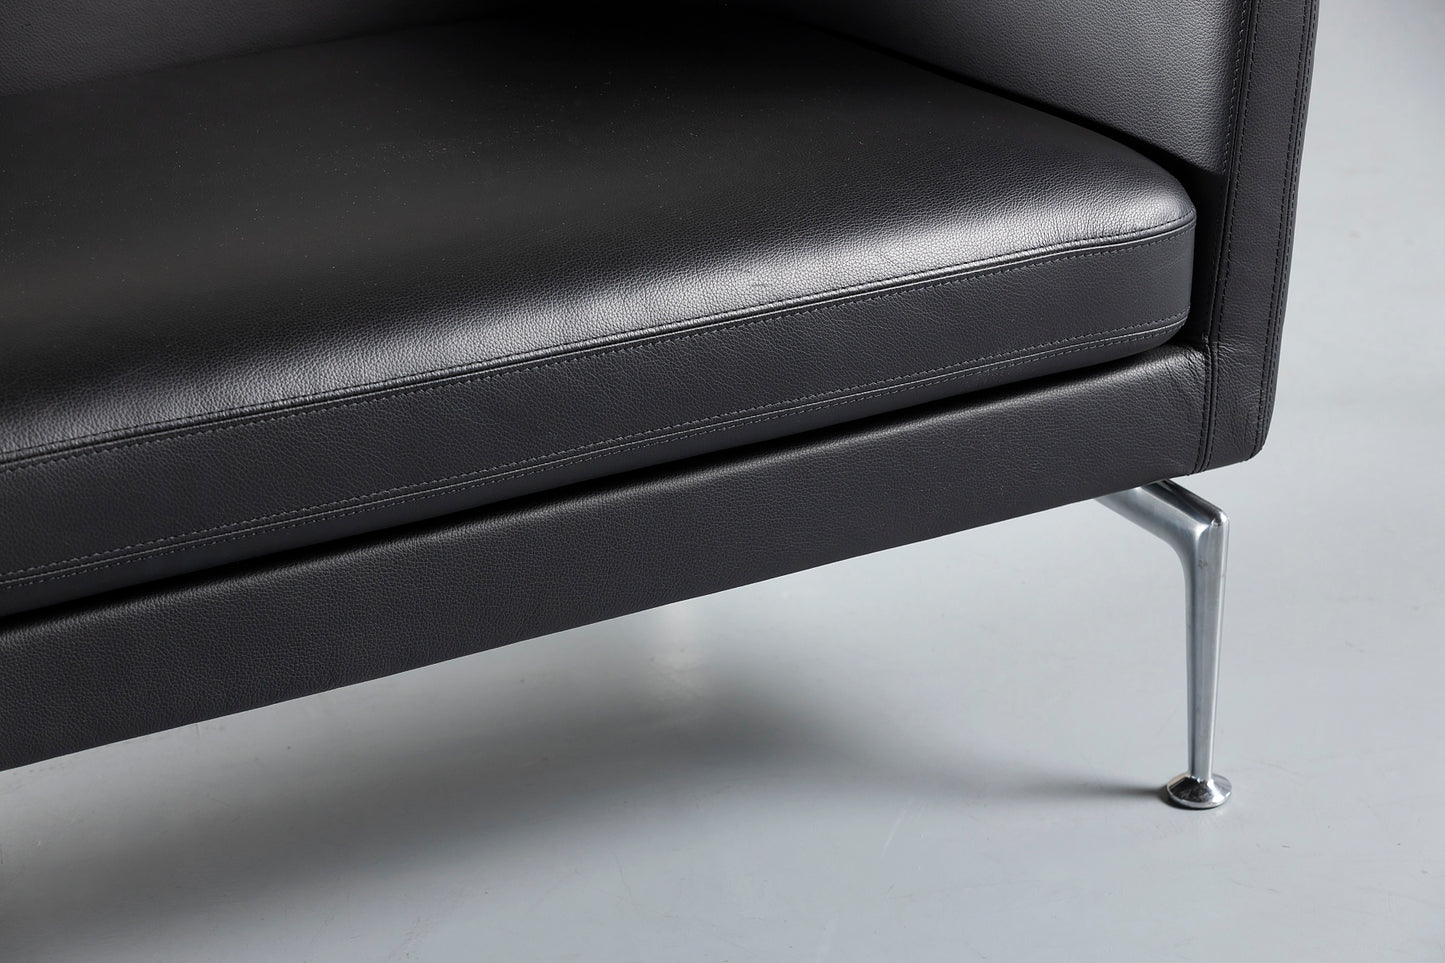 Vitra Suita Club Black Leather Sofa By Charles And Ray Eames, Germany, 1990'